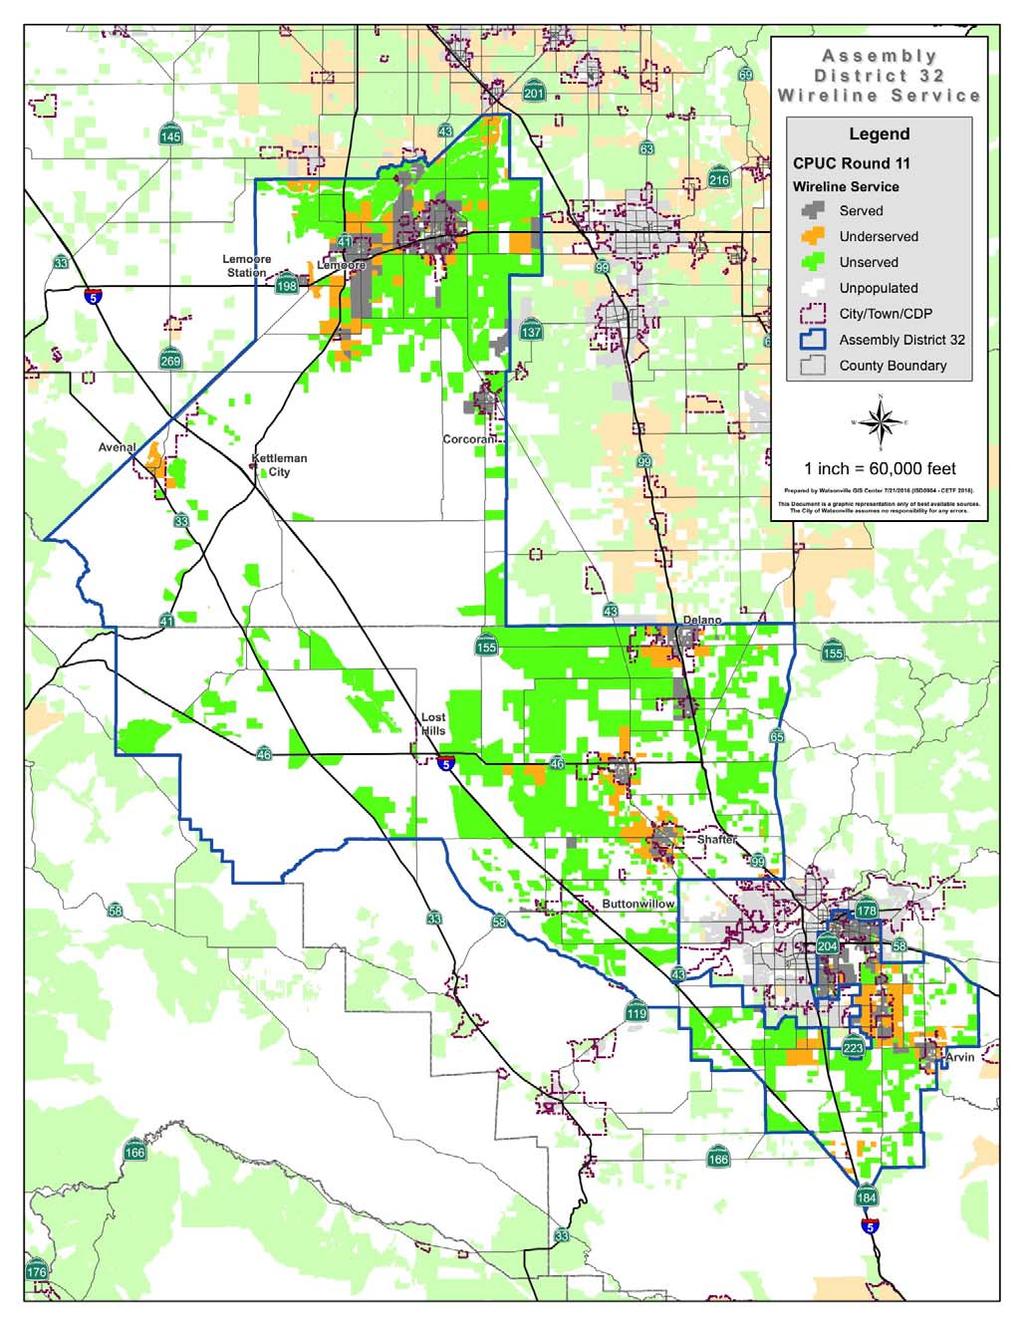 The Digital Divide In Assembly District 32: Broadband Wireline Service District 32 Served Underserved Unserved Total Households 109,689 5,419 8,994 124,102 88% 4% 7% 100% Population 381,366 19,510